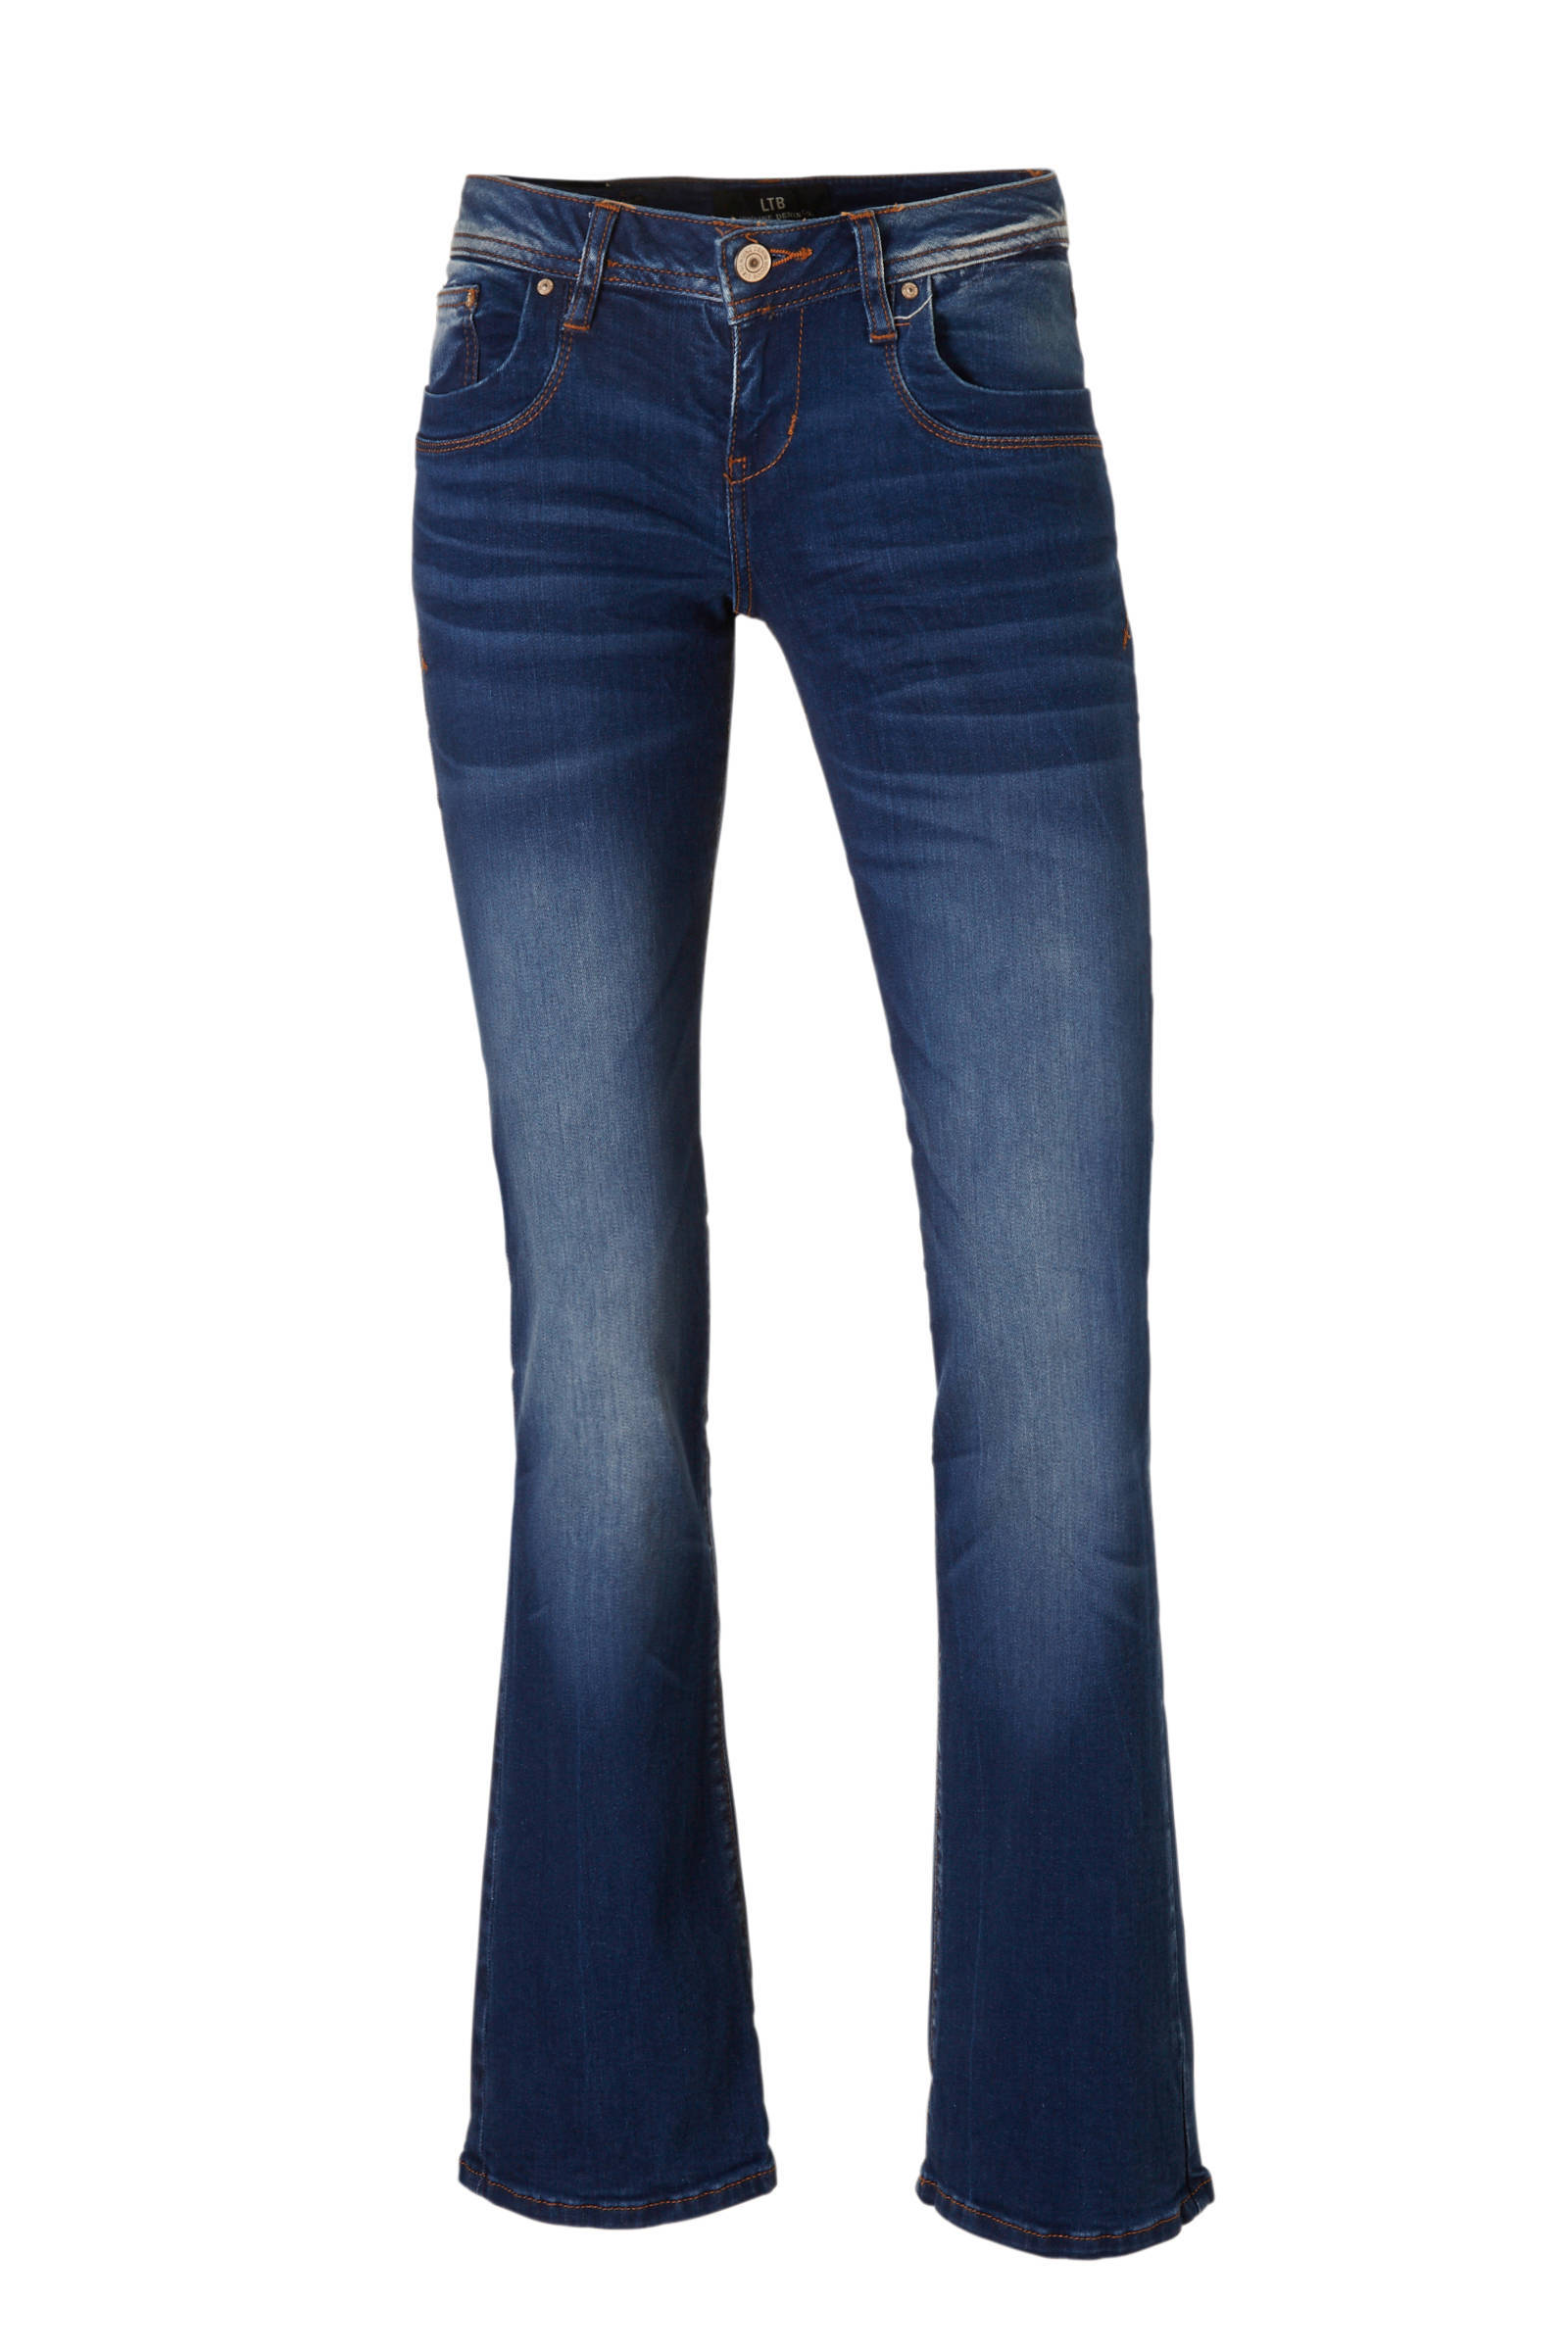 ltb flared jeans